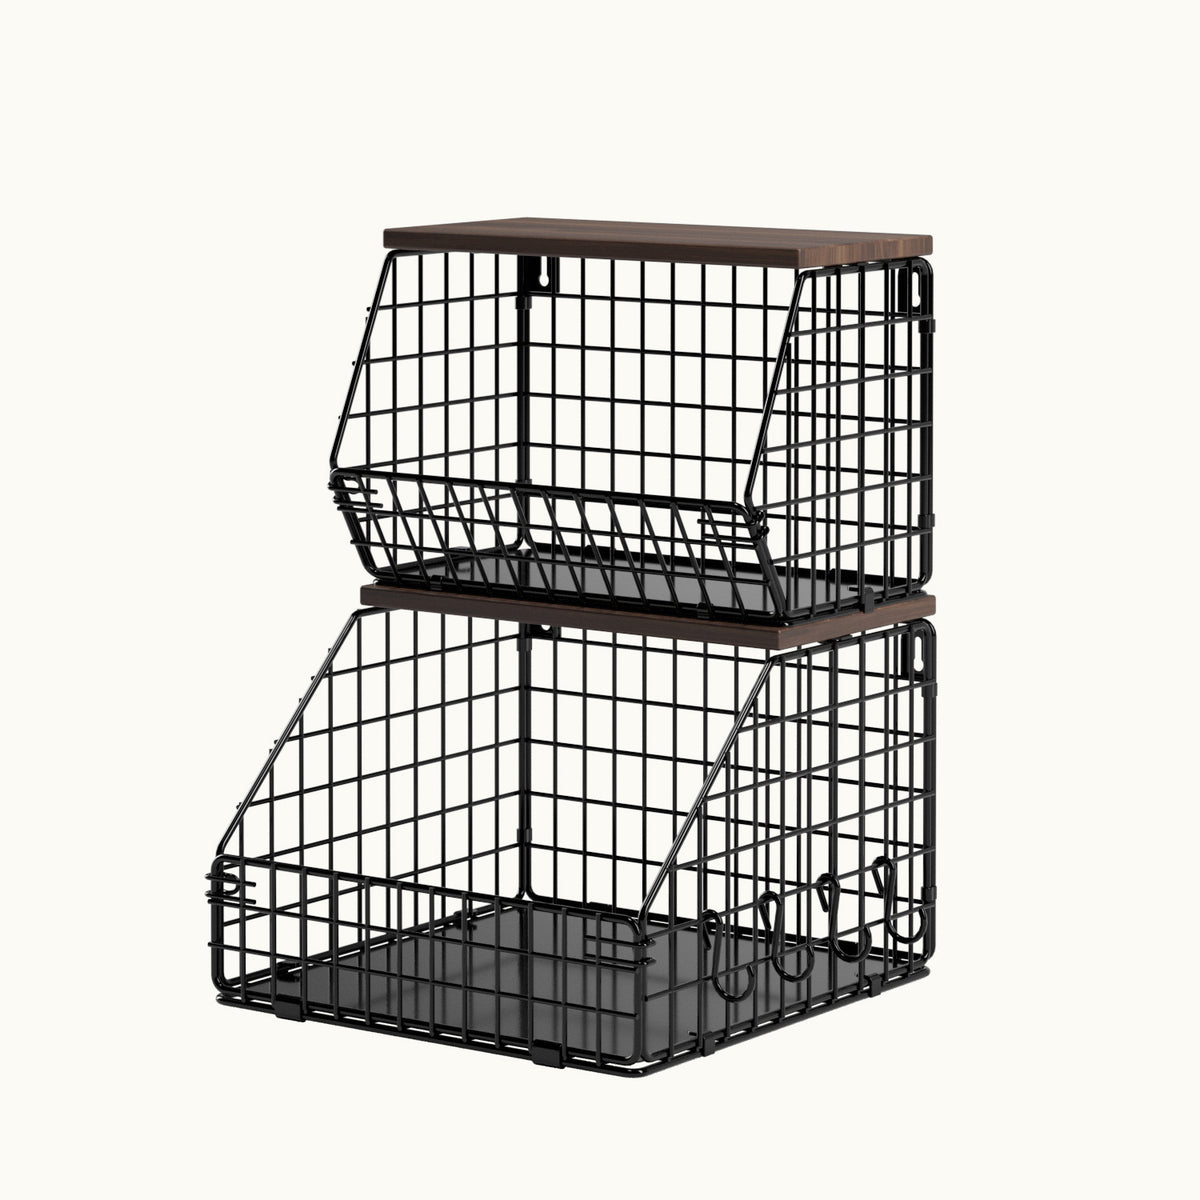 Adorila Fruit and Vegetable Storage, Wall Mounted Stackable Fruit Baskets with Wood Lid, Hanging Metal Wire Baskets for Kitchen Counter (Black)